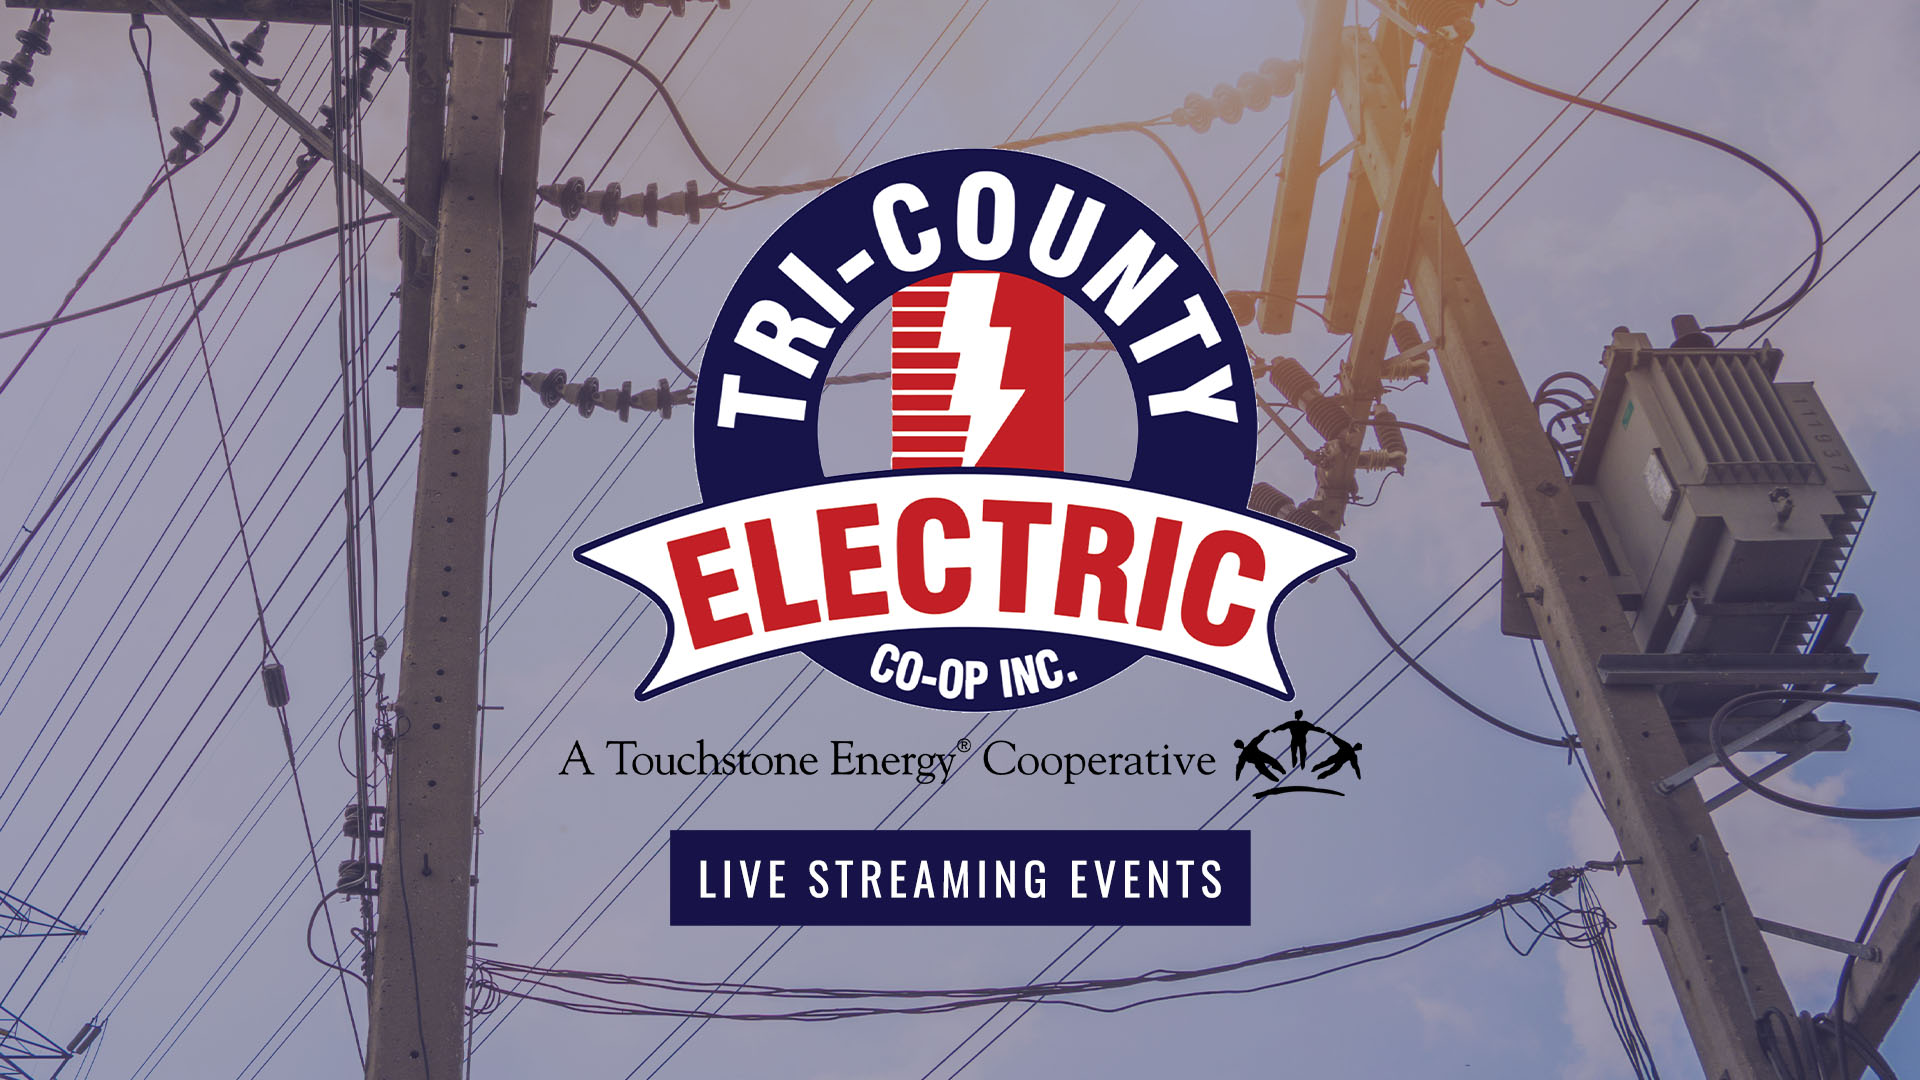 Tri-County Electric Cooperative (Members)